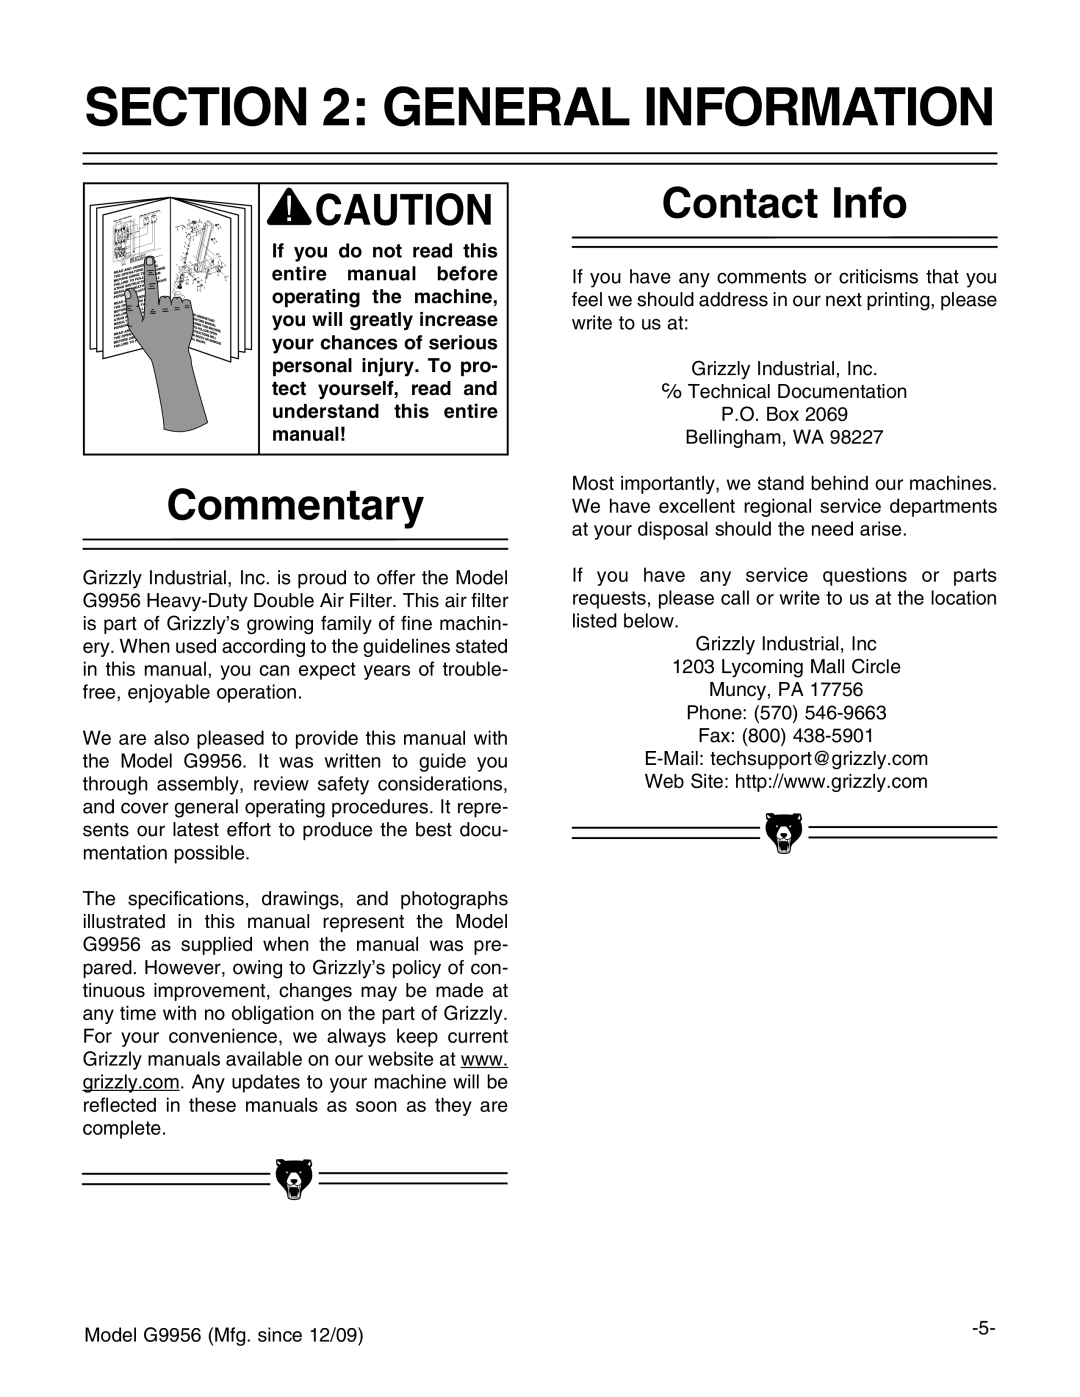 Grizzly G9956 instruction manual General Information, Commentary, Contact Info 